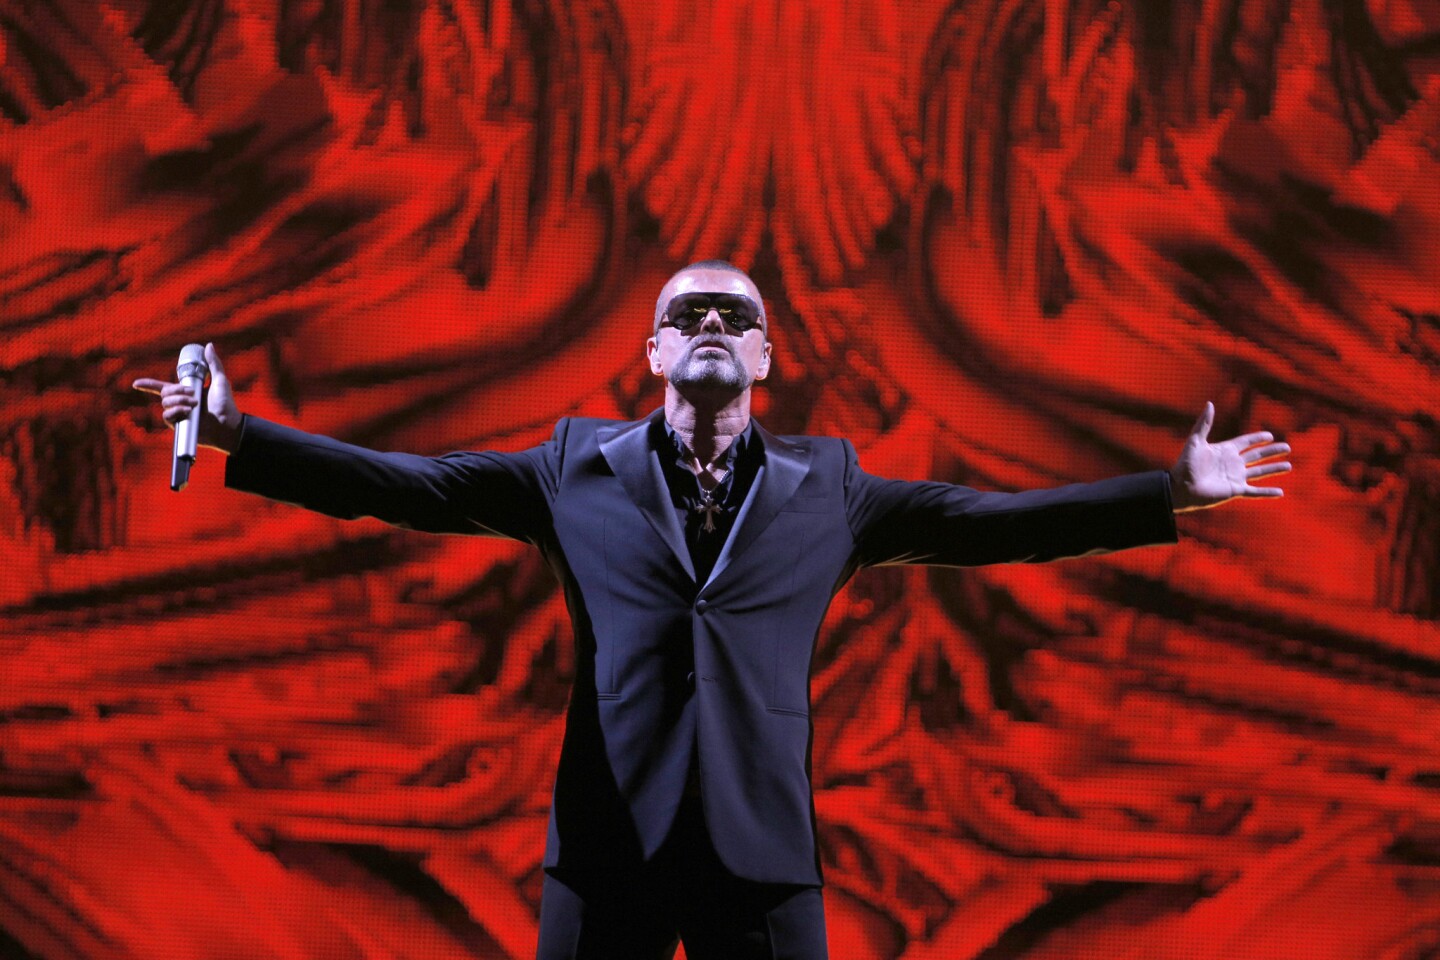 British singer George Michael performs at a concert in Paris in 2012 to raise money for an AIDS charity.